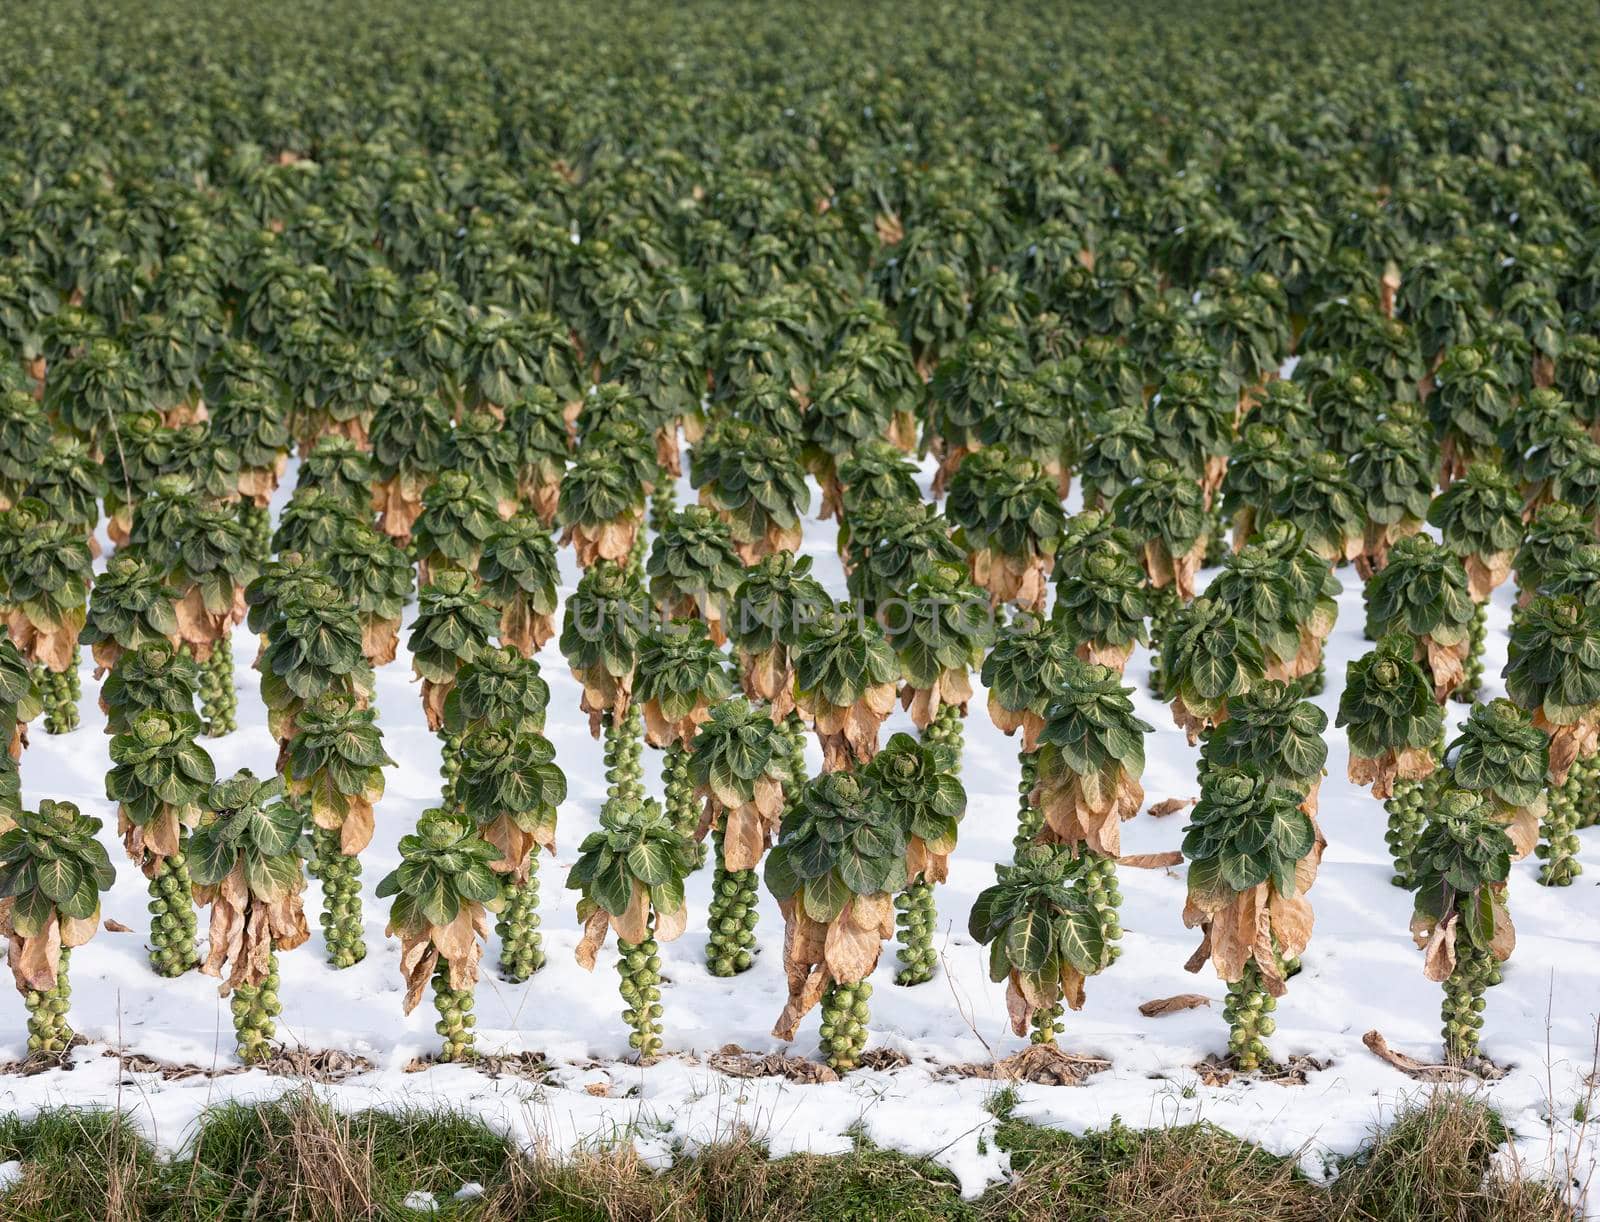 large amount of brussels sprouts in winter field with snow